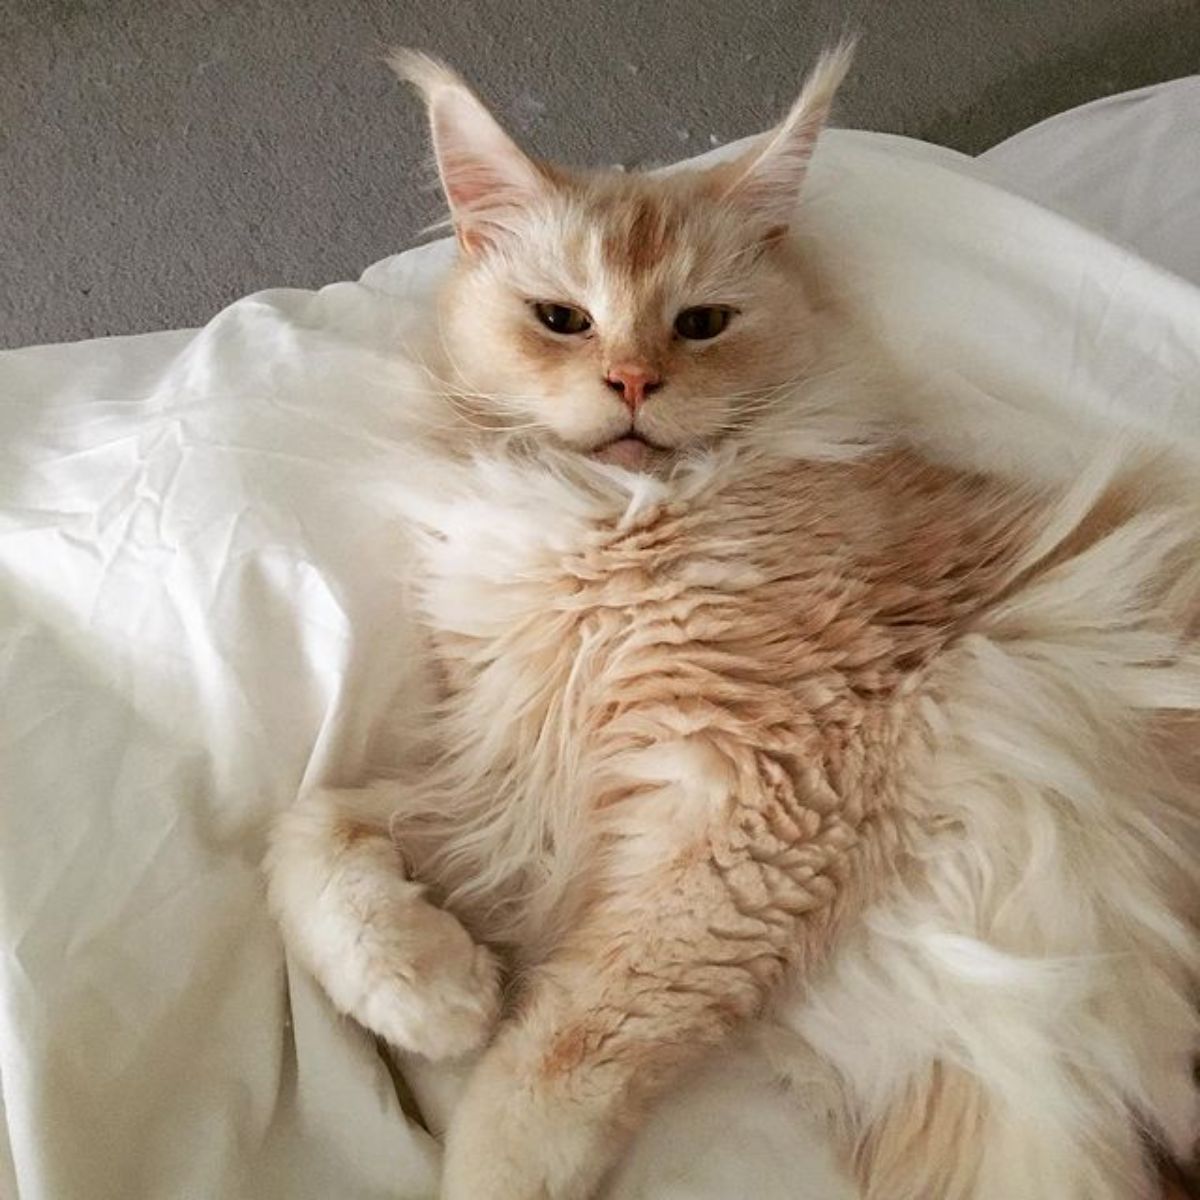 A fluffy creamy maine coon lying on a white blanket.